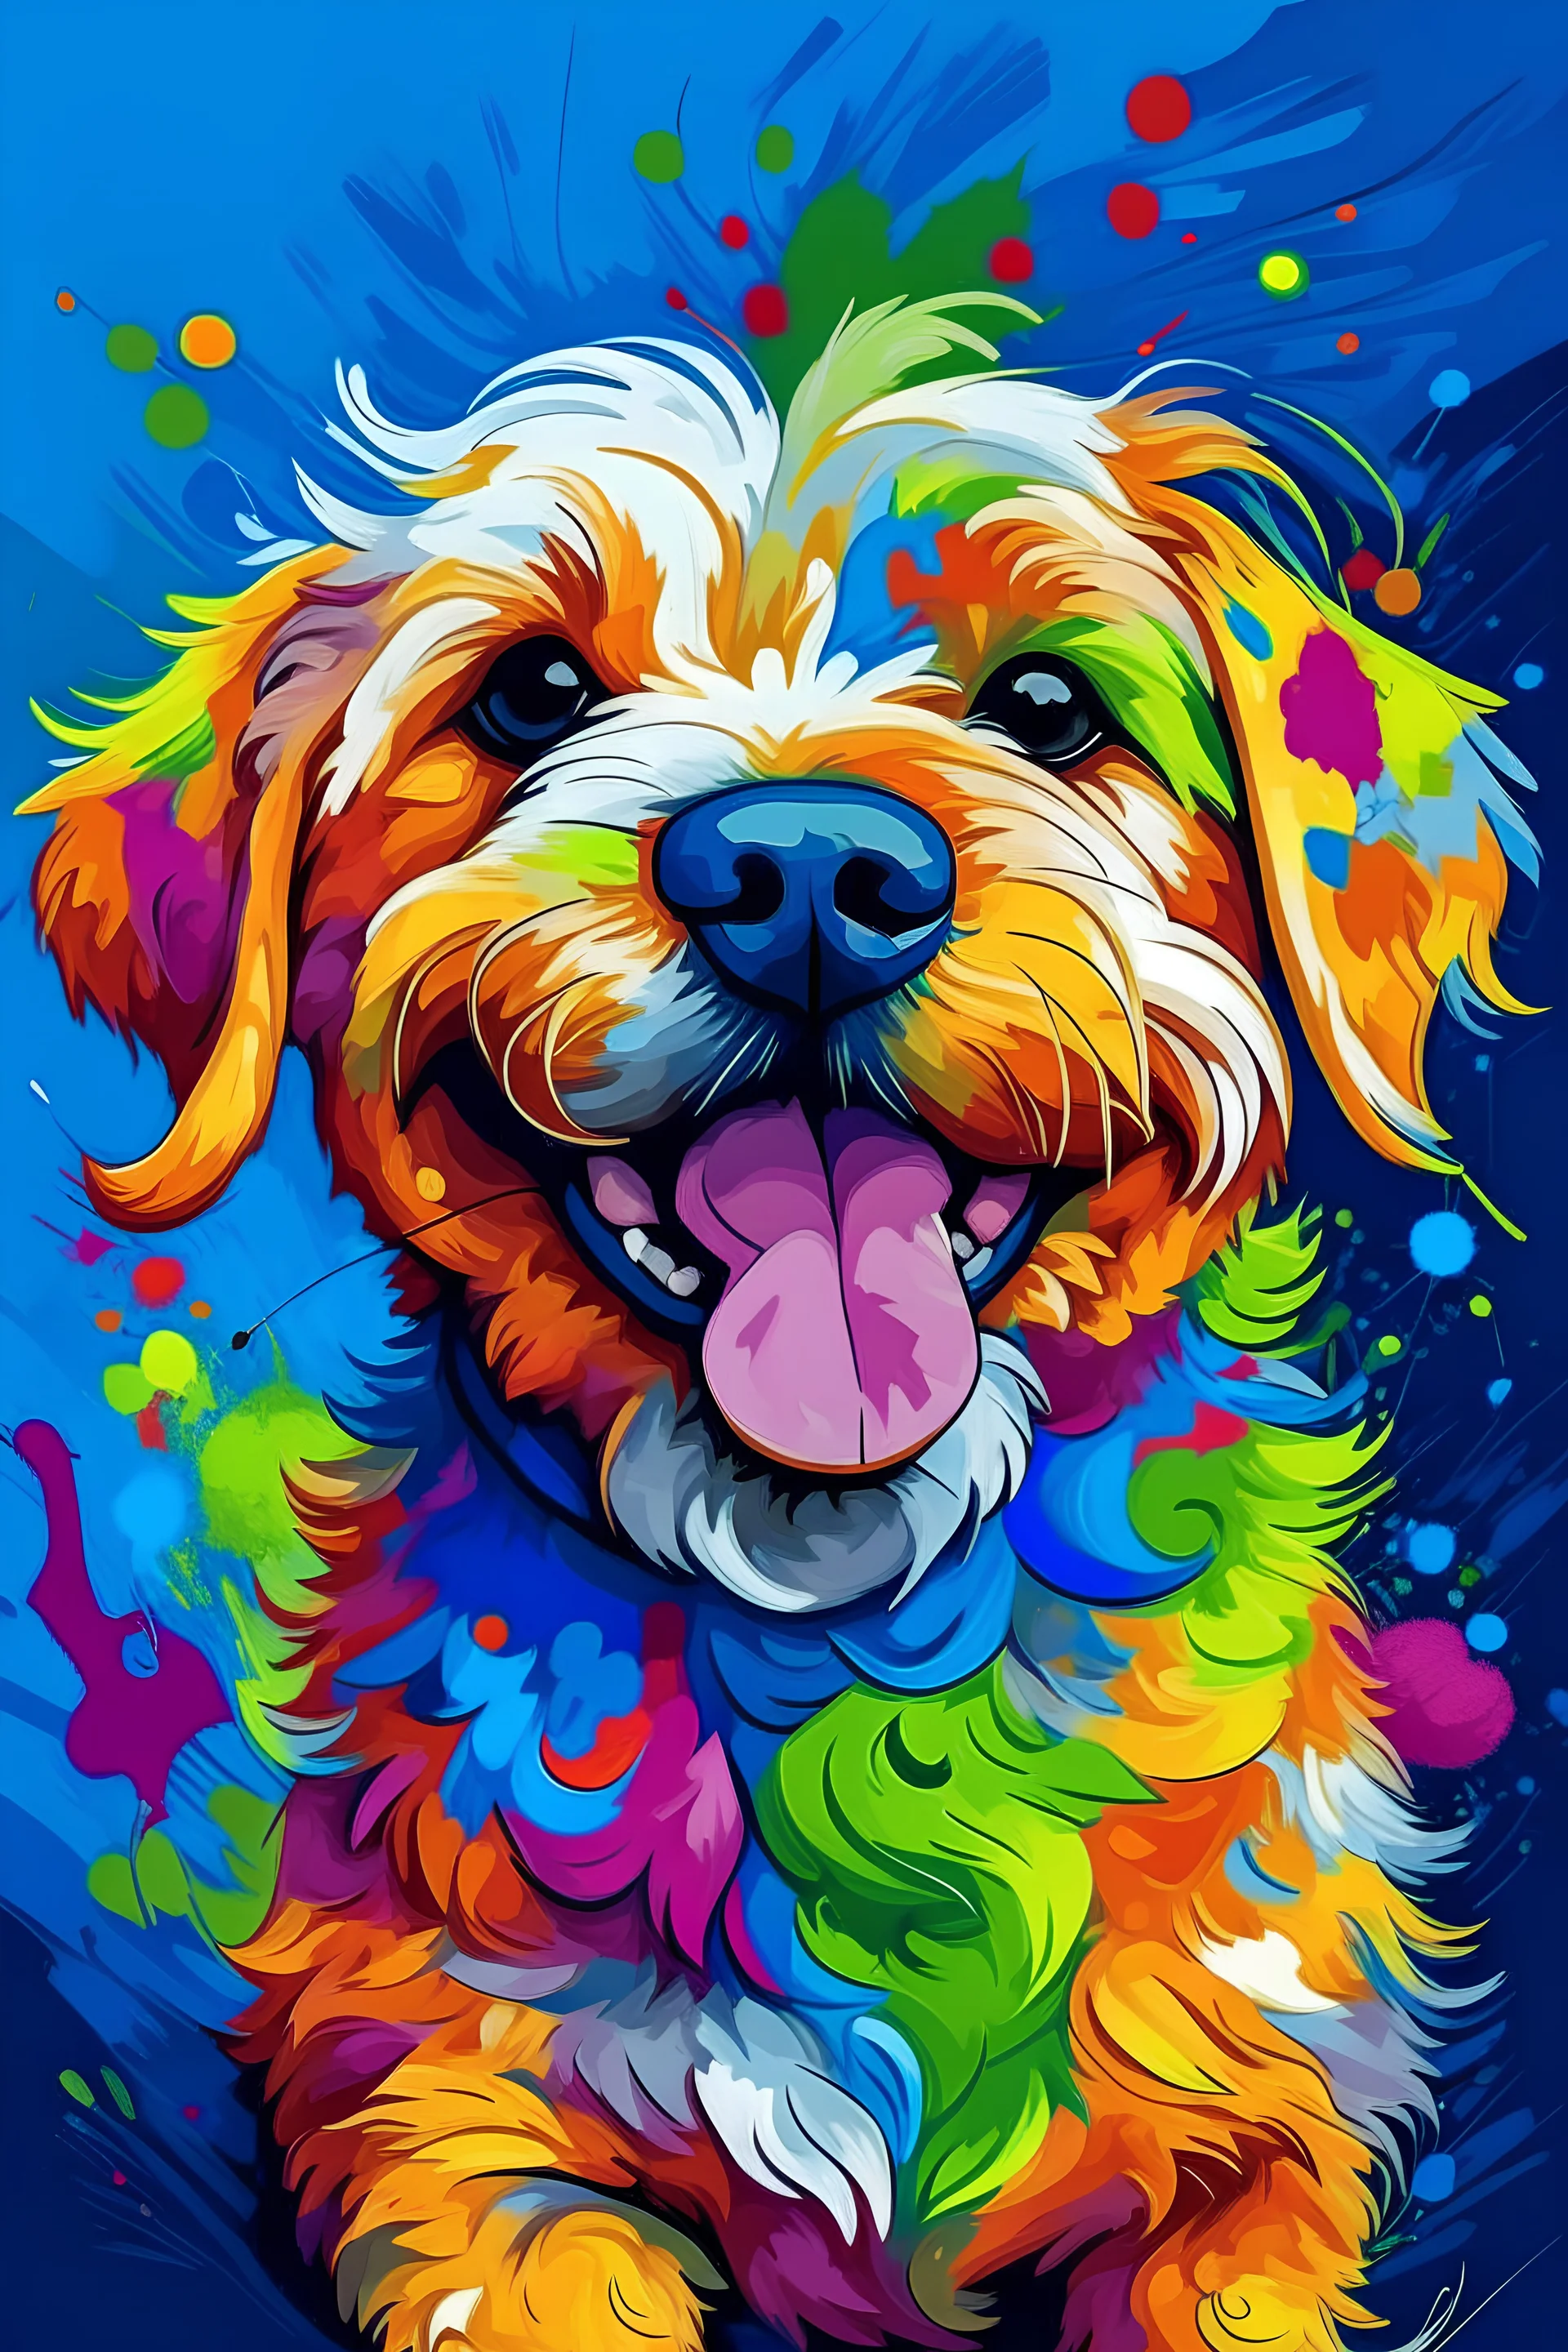 An art for a cute happy dog, detailed, ten different colors, painted